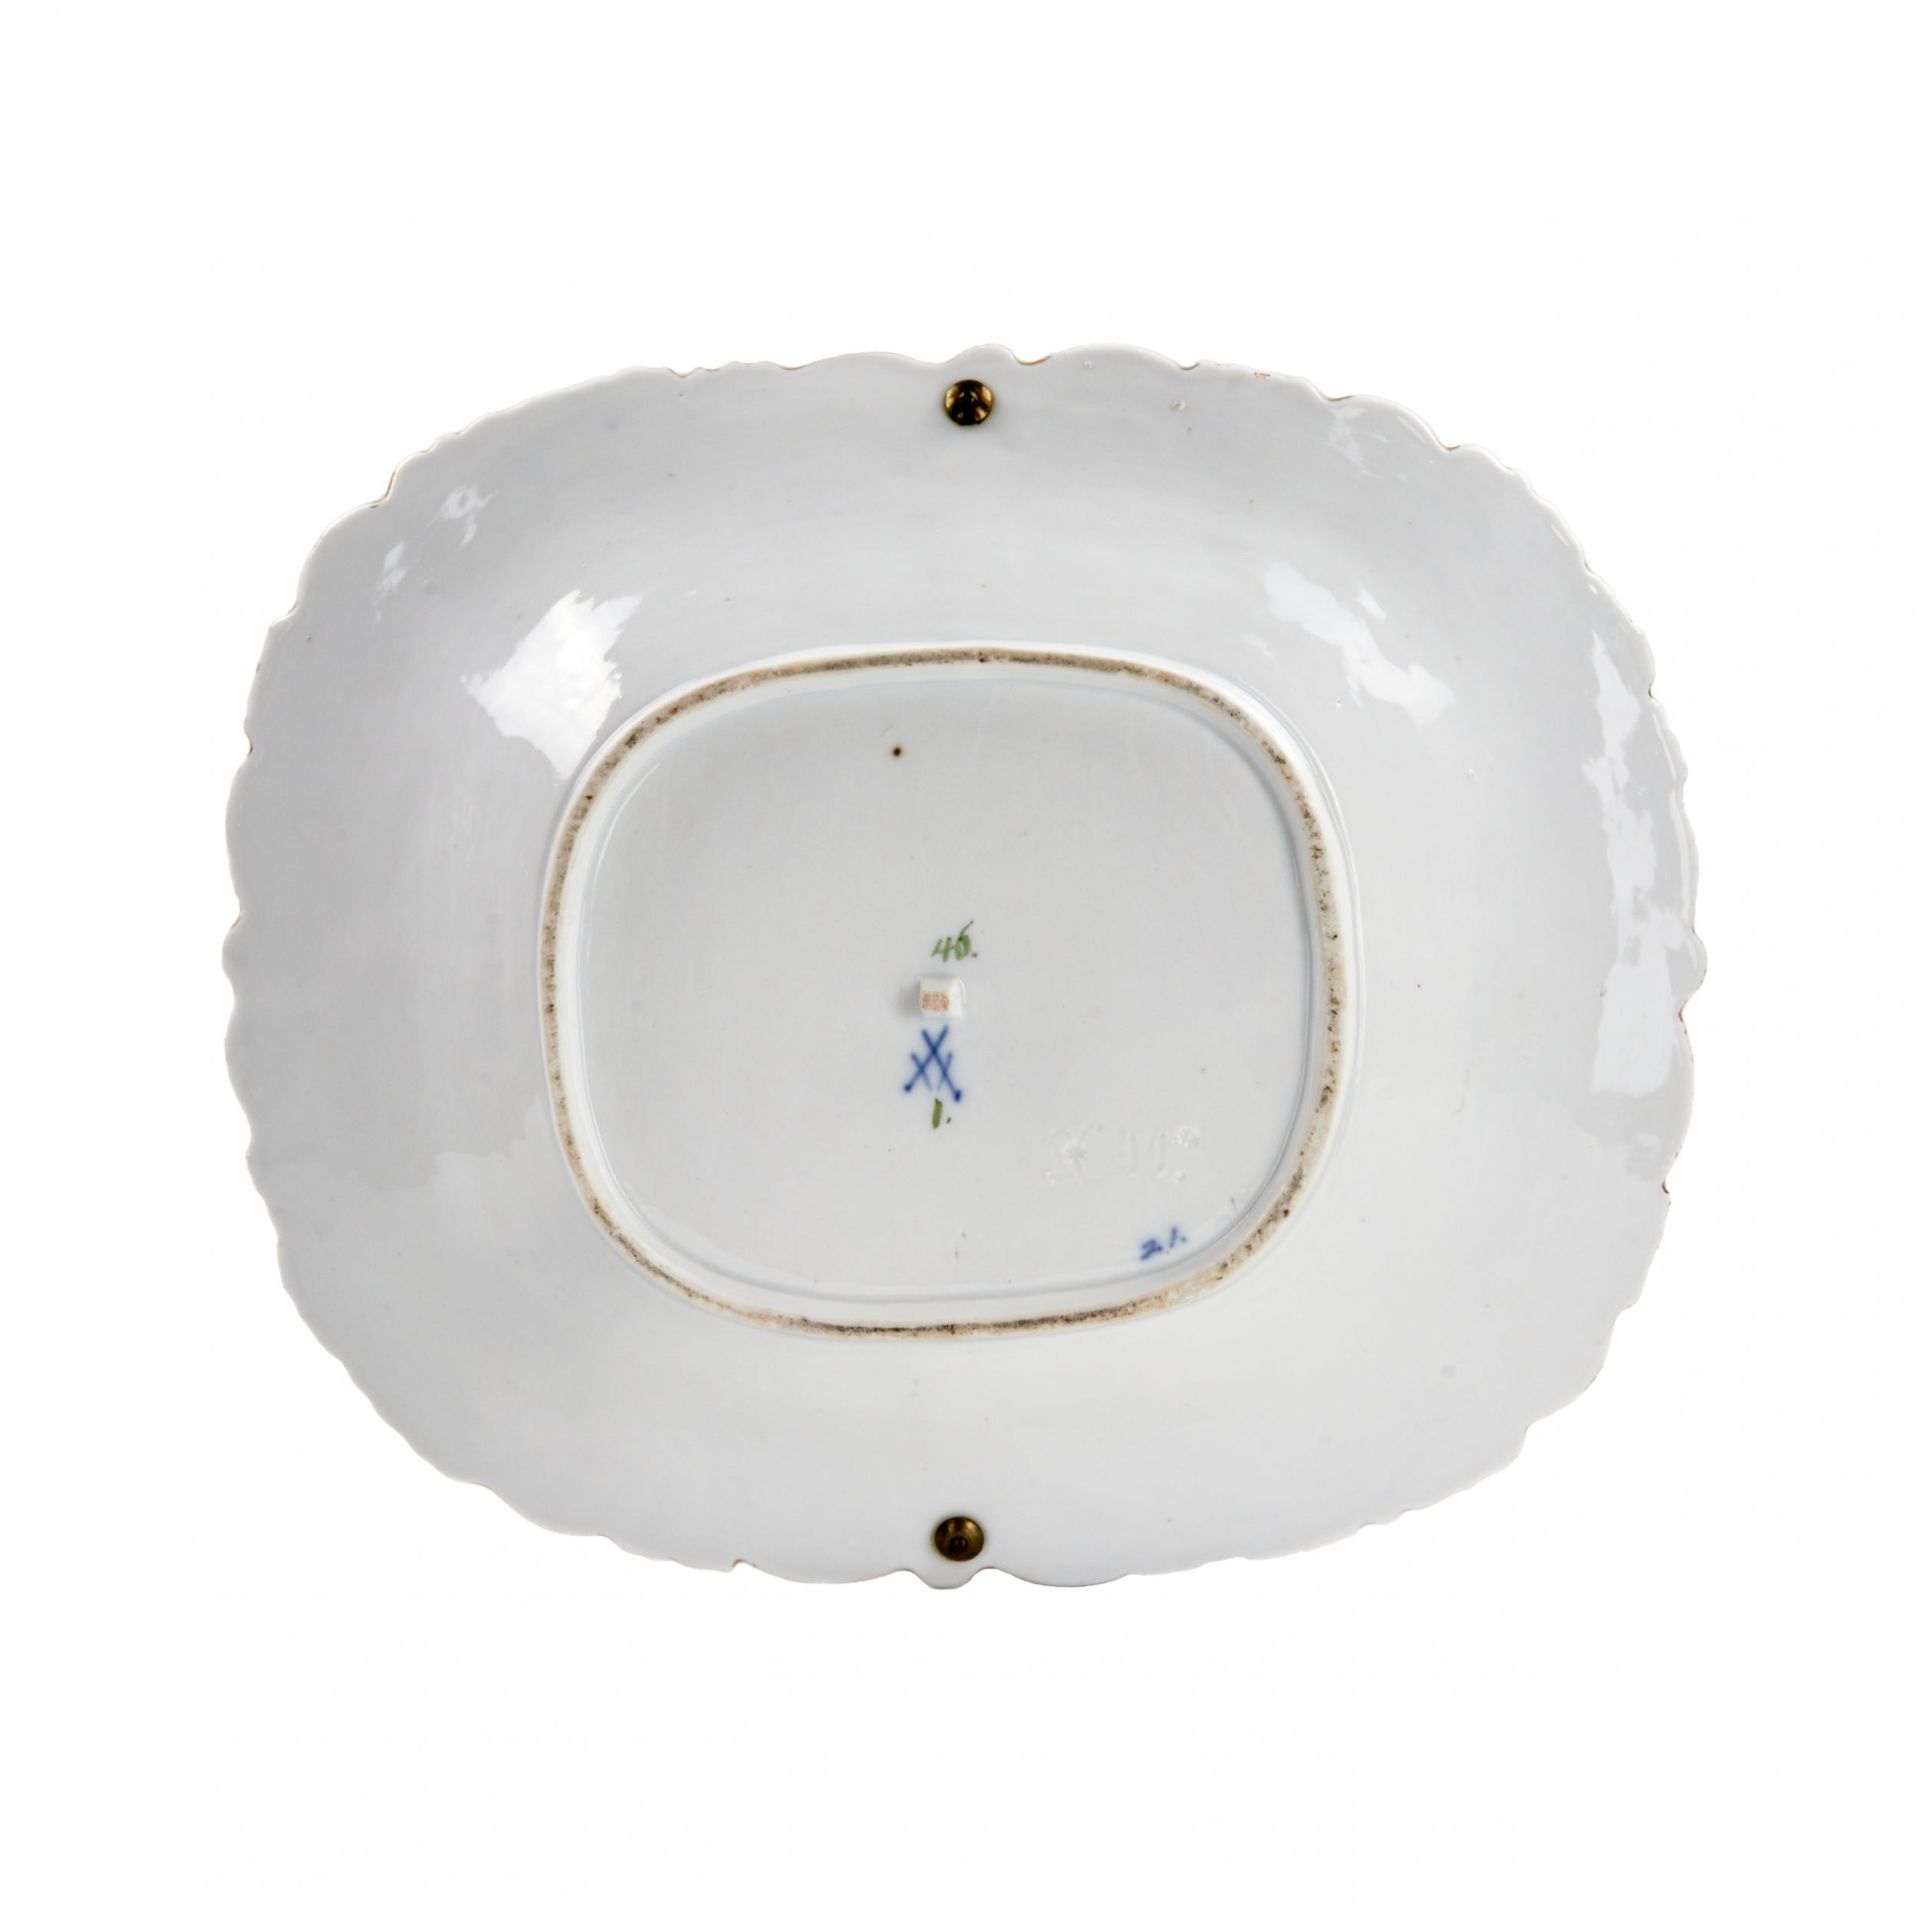 Meissen porcelain dish with metal handle. - Image 5 of 5